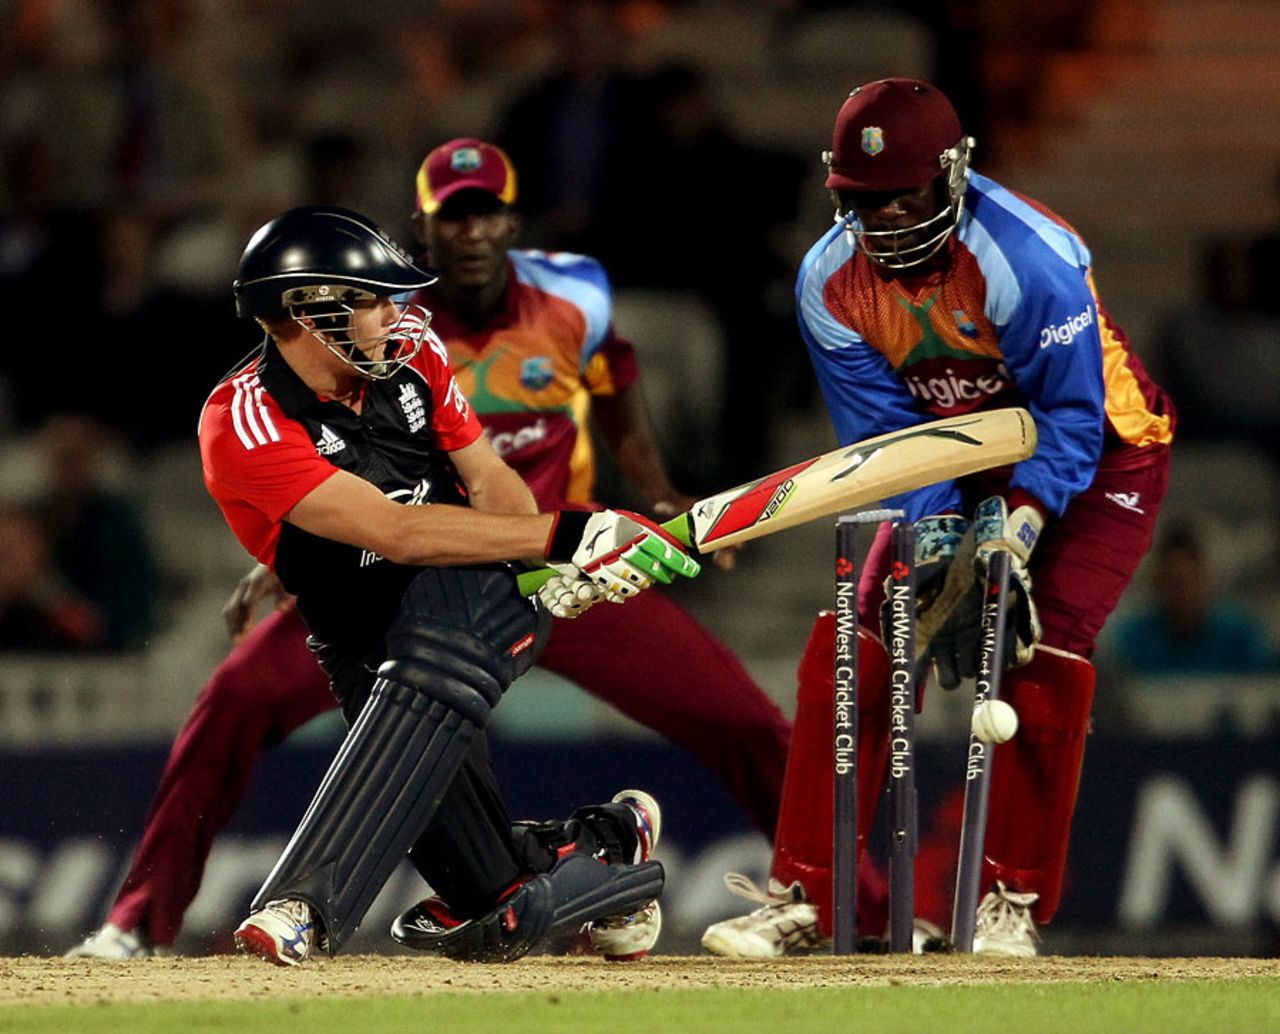 Jonny Bairstow was bowled as spin caused England problems, England v West Indies, 2nd Twenty20, The Oval, September 25, 2011